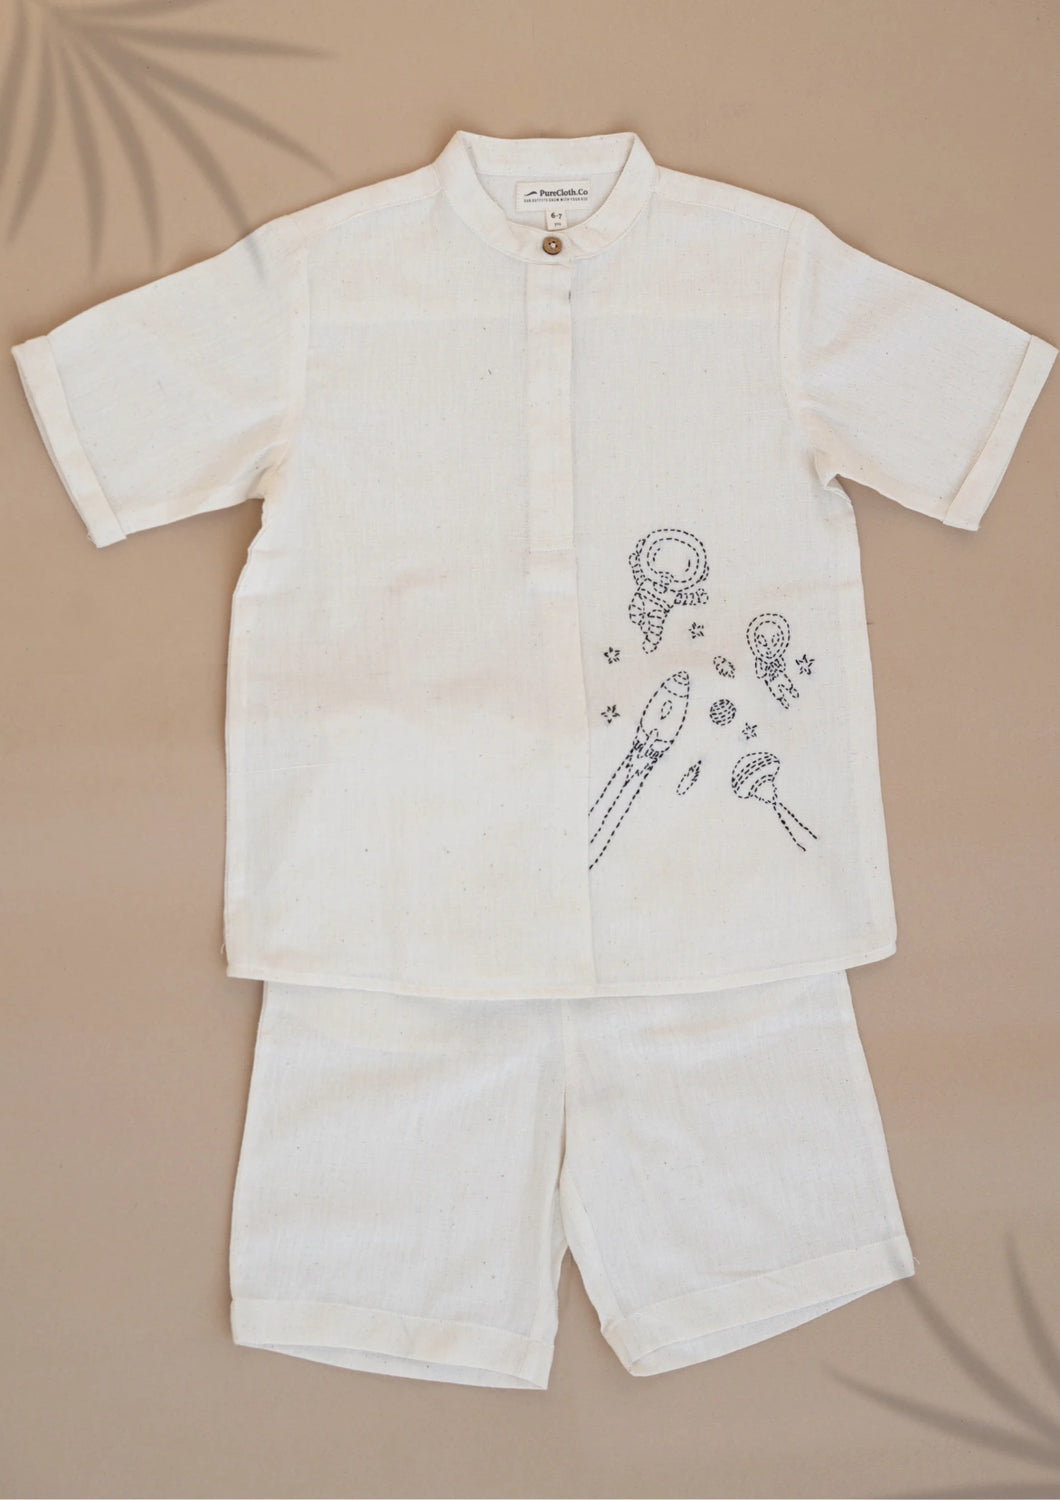 A set of white coloured Organic Cotton Doodle Shirt and Cargo Shorts kidswear kept on a biege coloured background